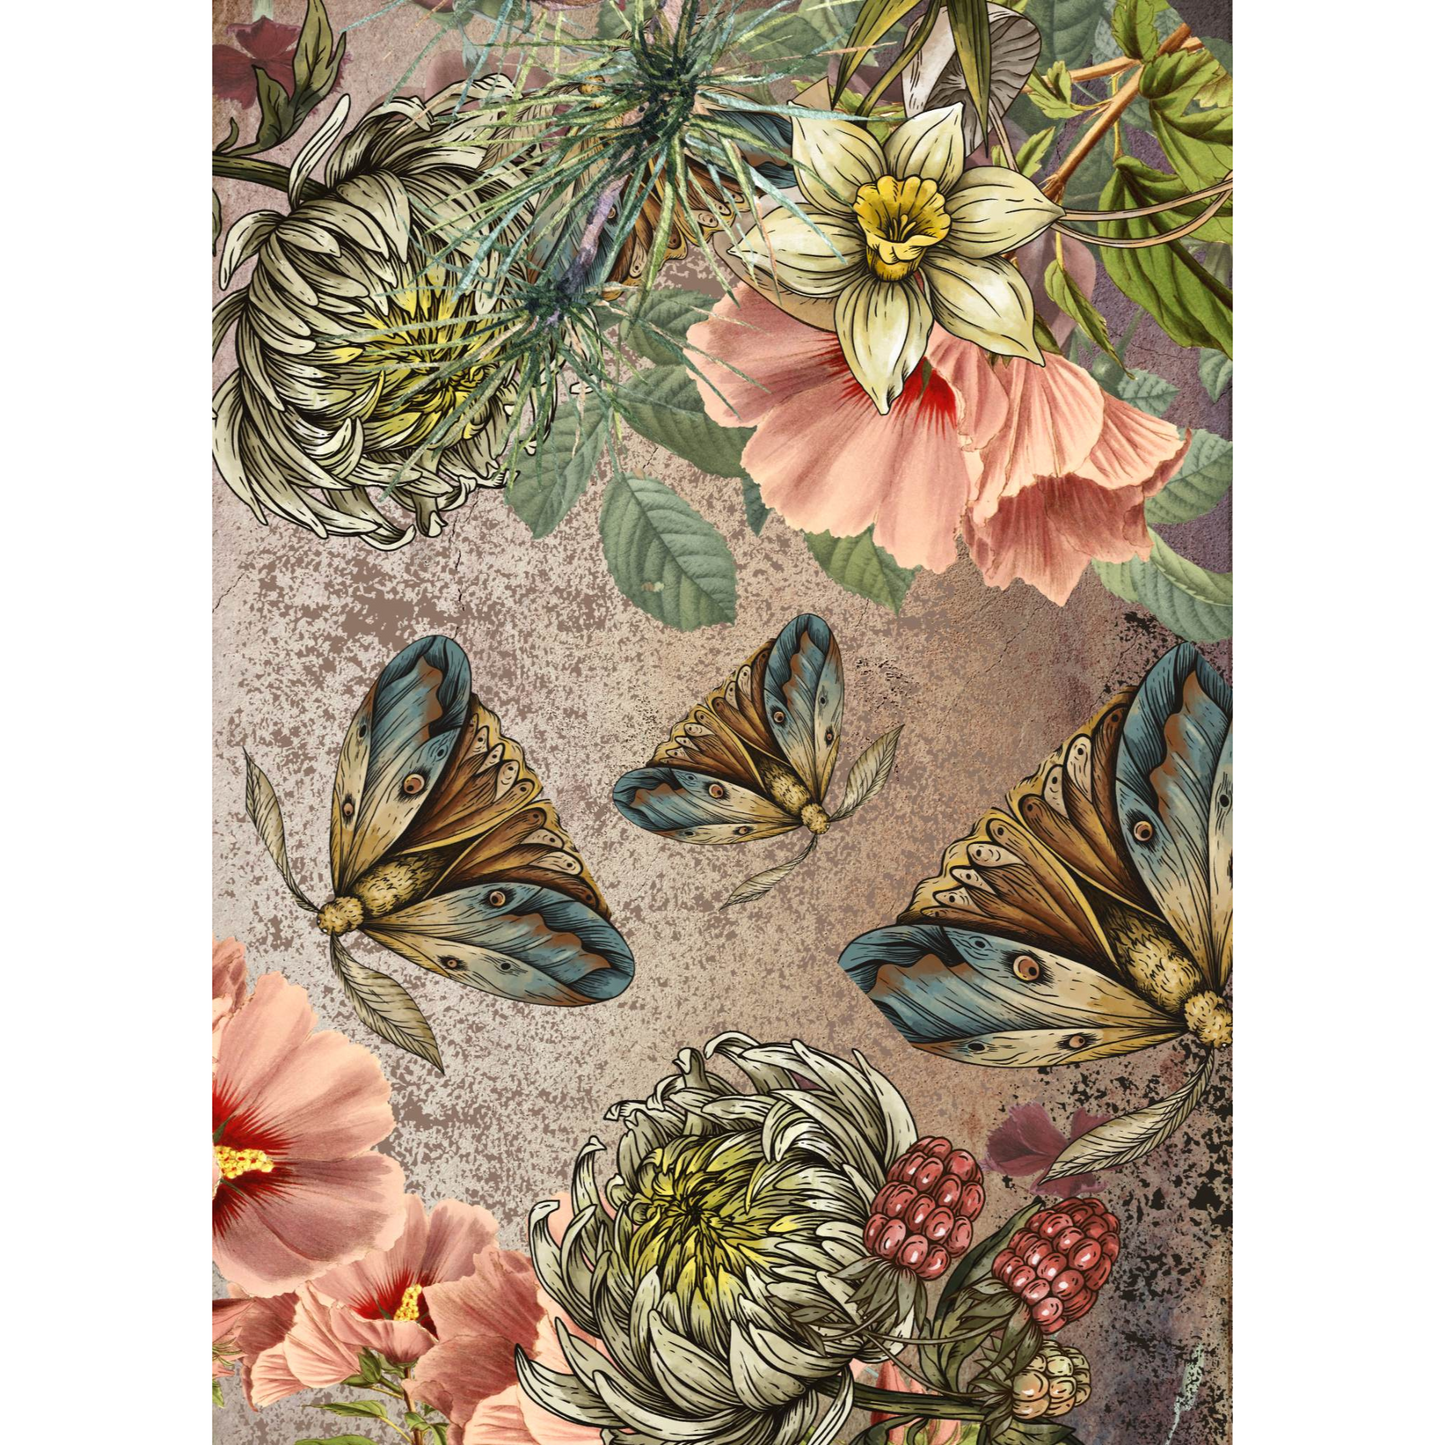 "Big Moff" Decoupage Paper Set by Made by Marley. Image 2 and 3 of 3 sheet set. Size A3 available at Milton's Daughter.